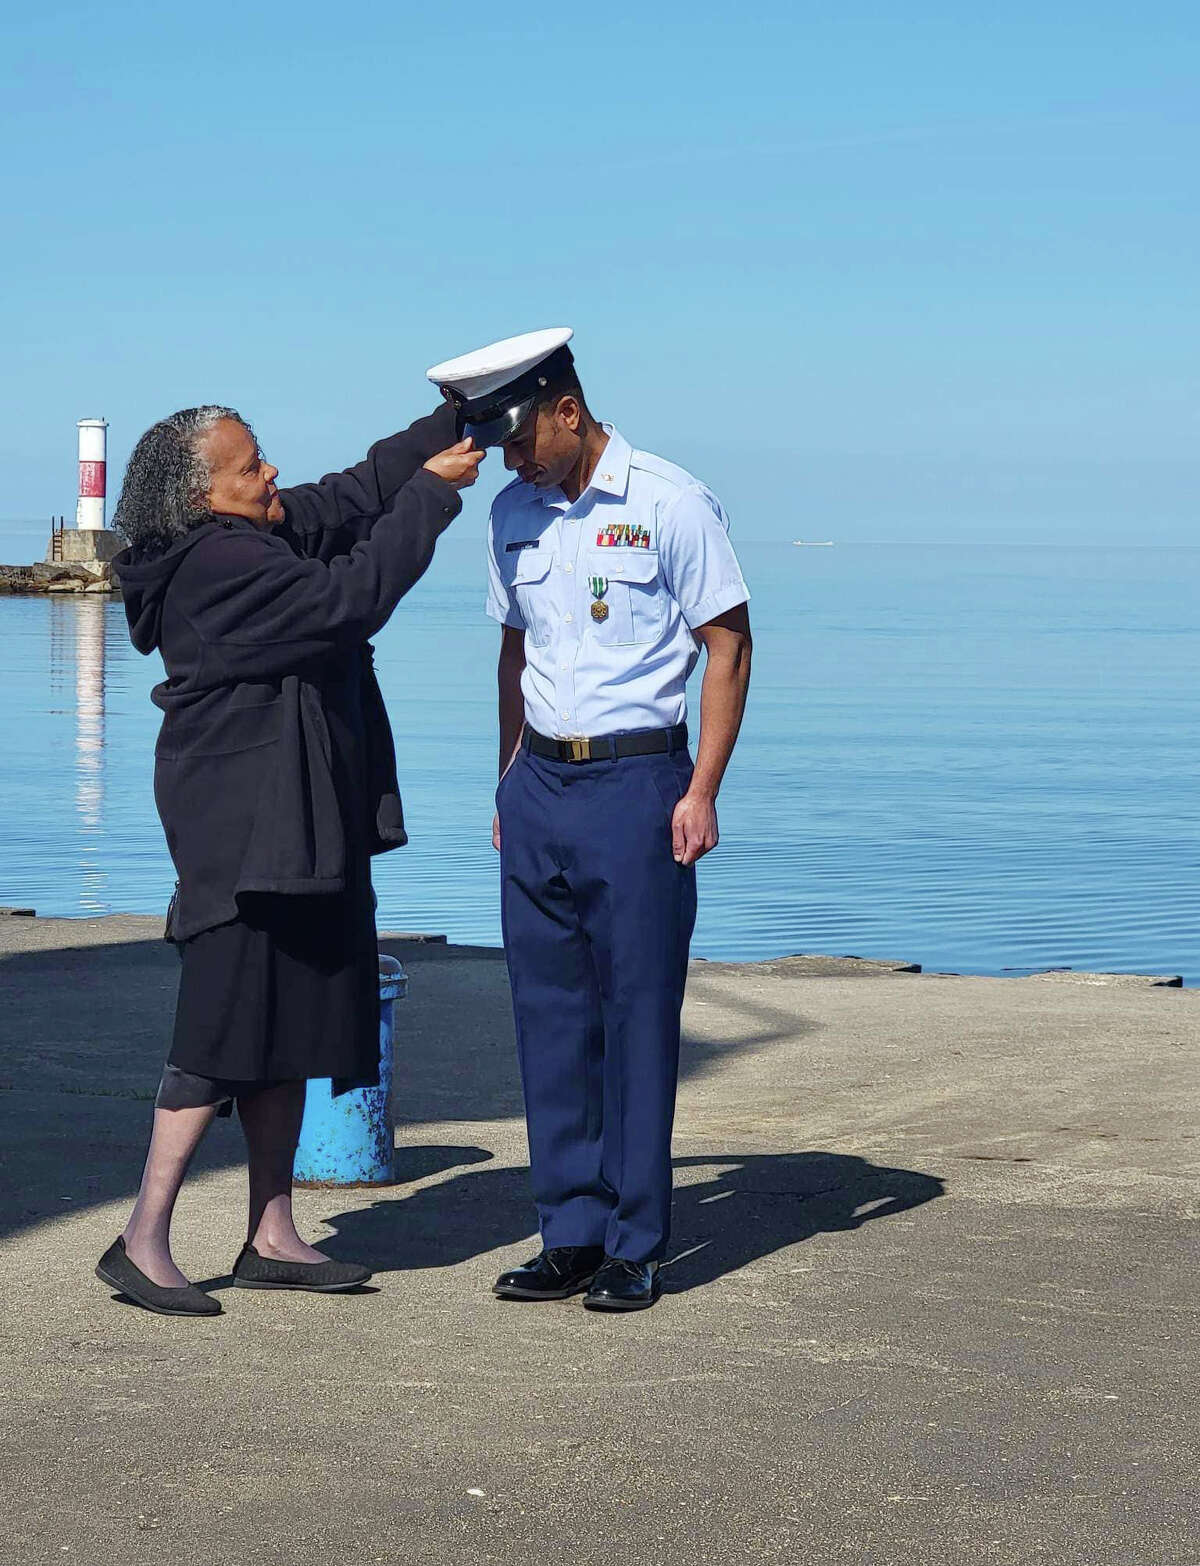 Manistee Coast Guard member promoted to chief at lighthouse ceremony